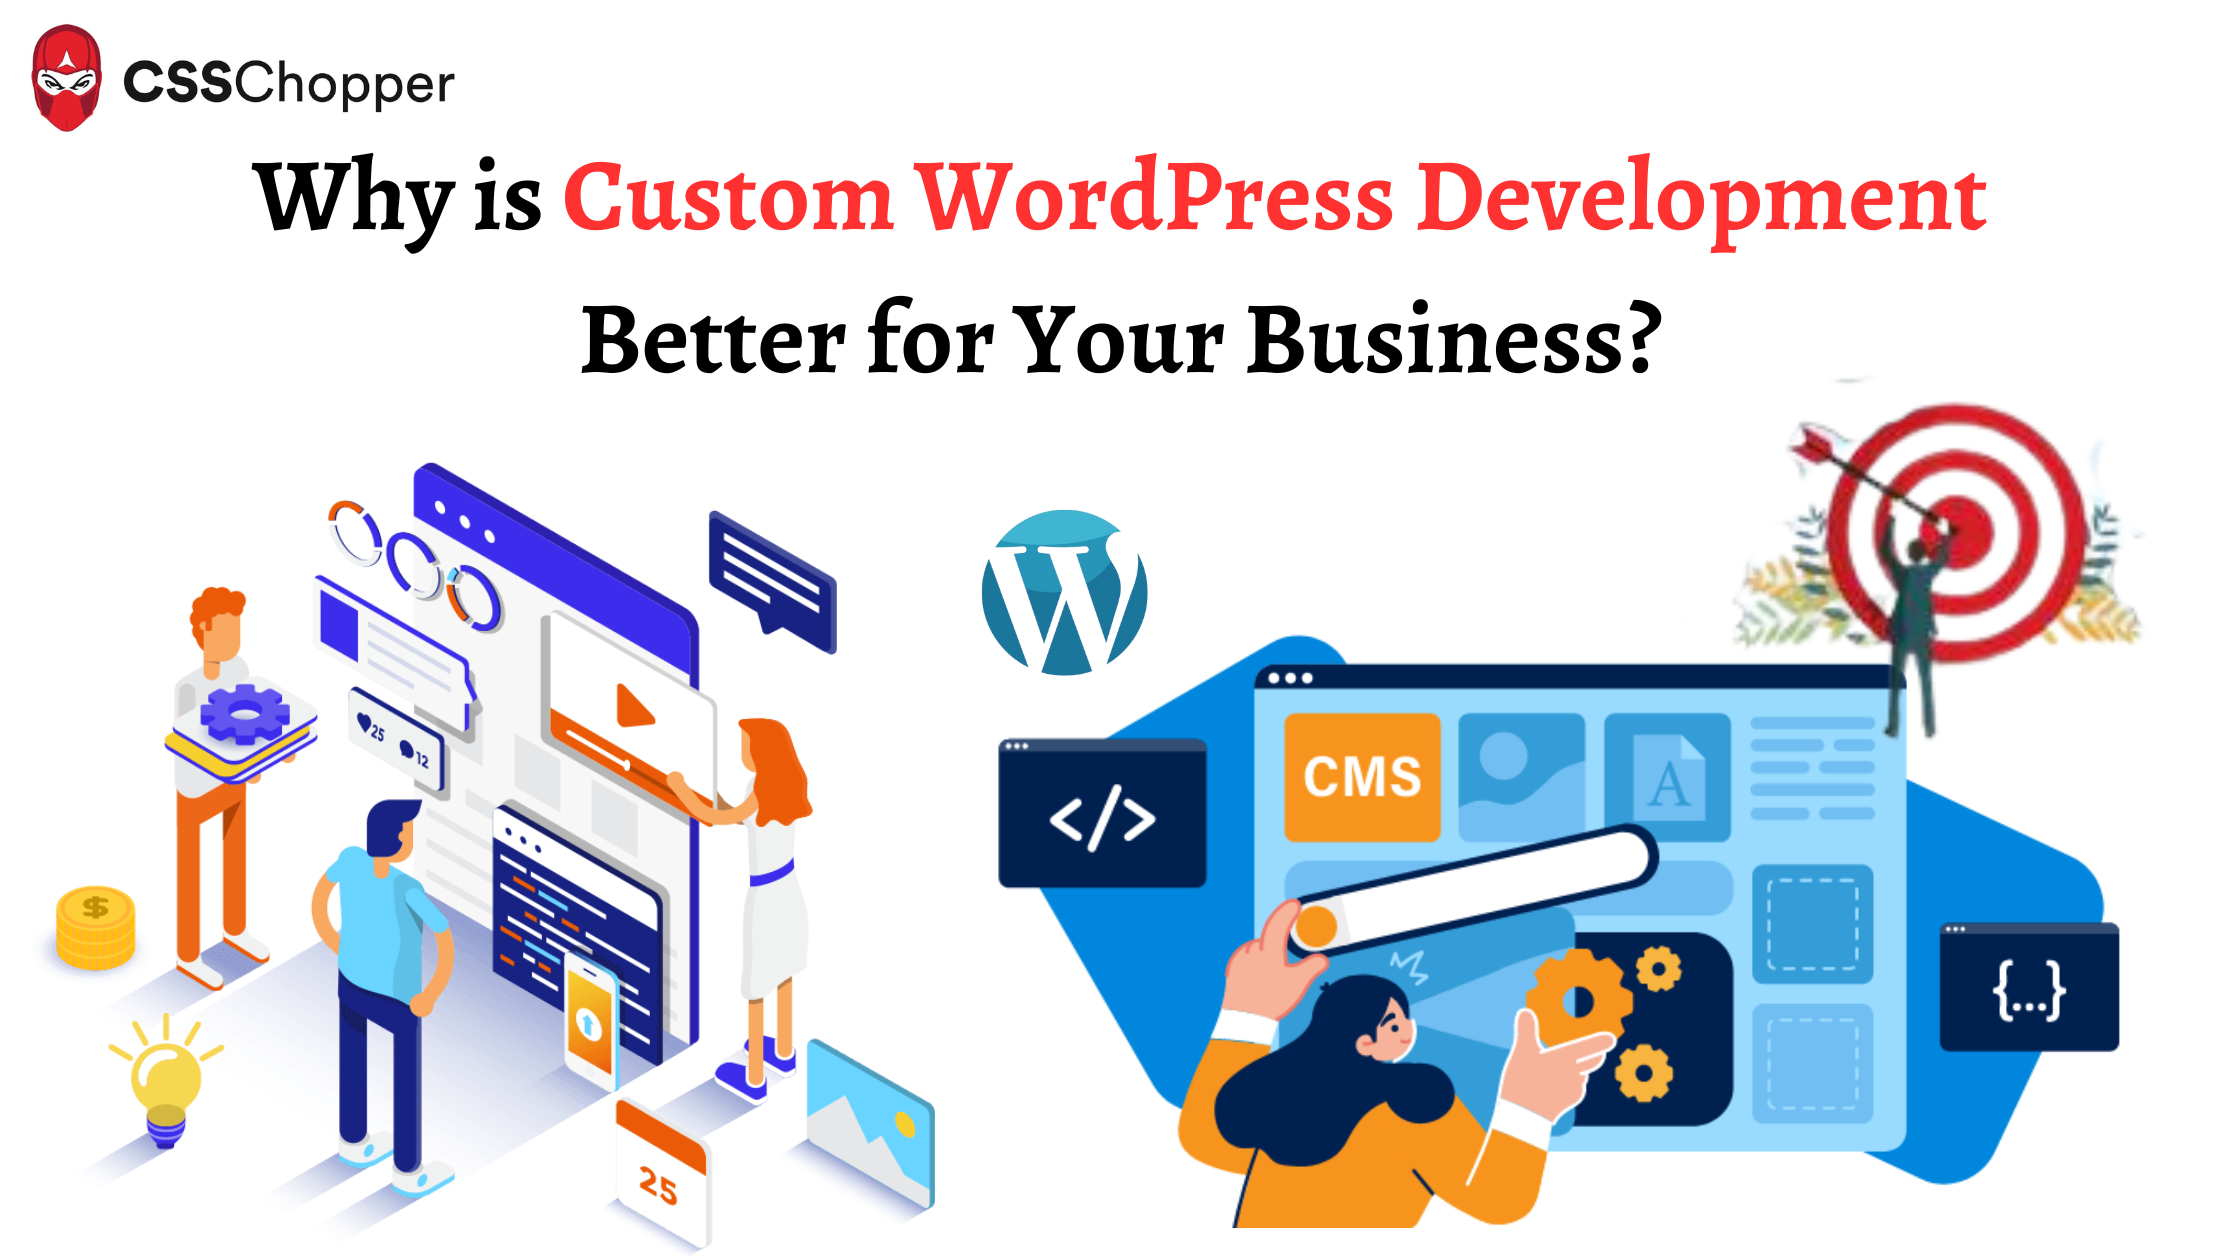 Why is Custom WordPress Development Better for Your Business?